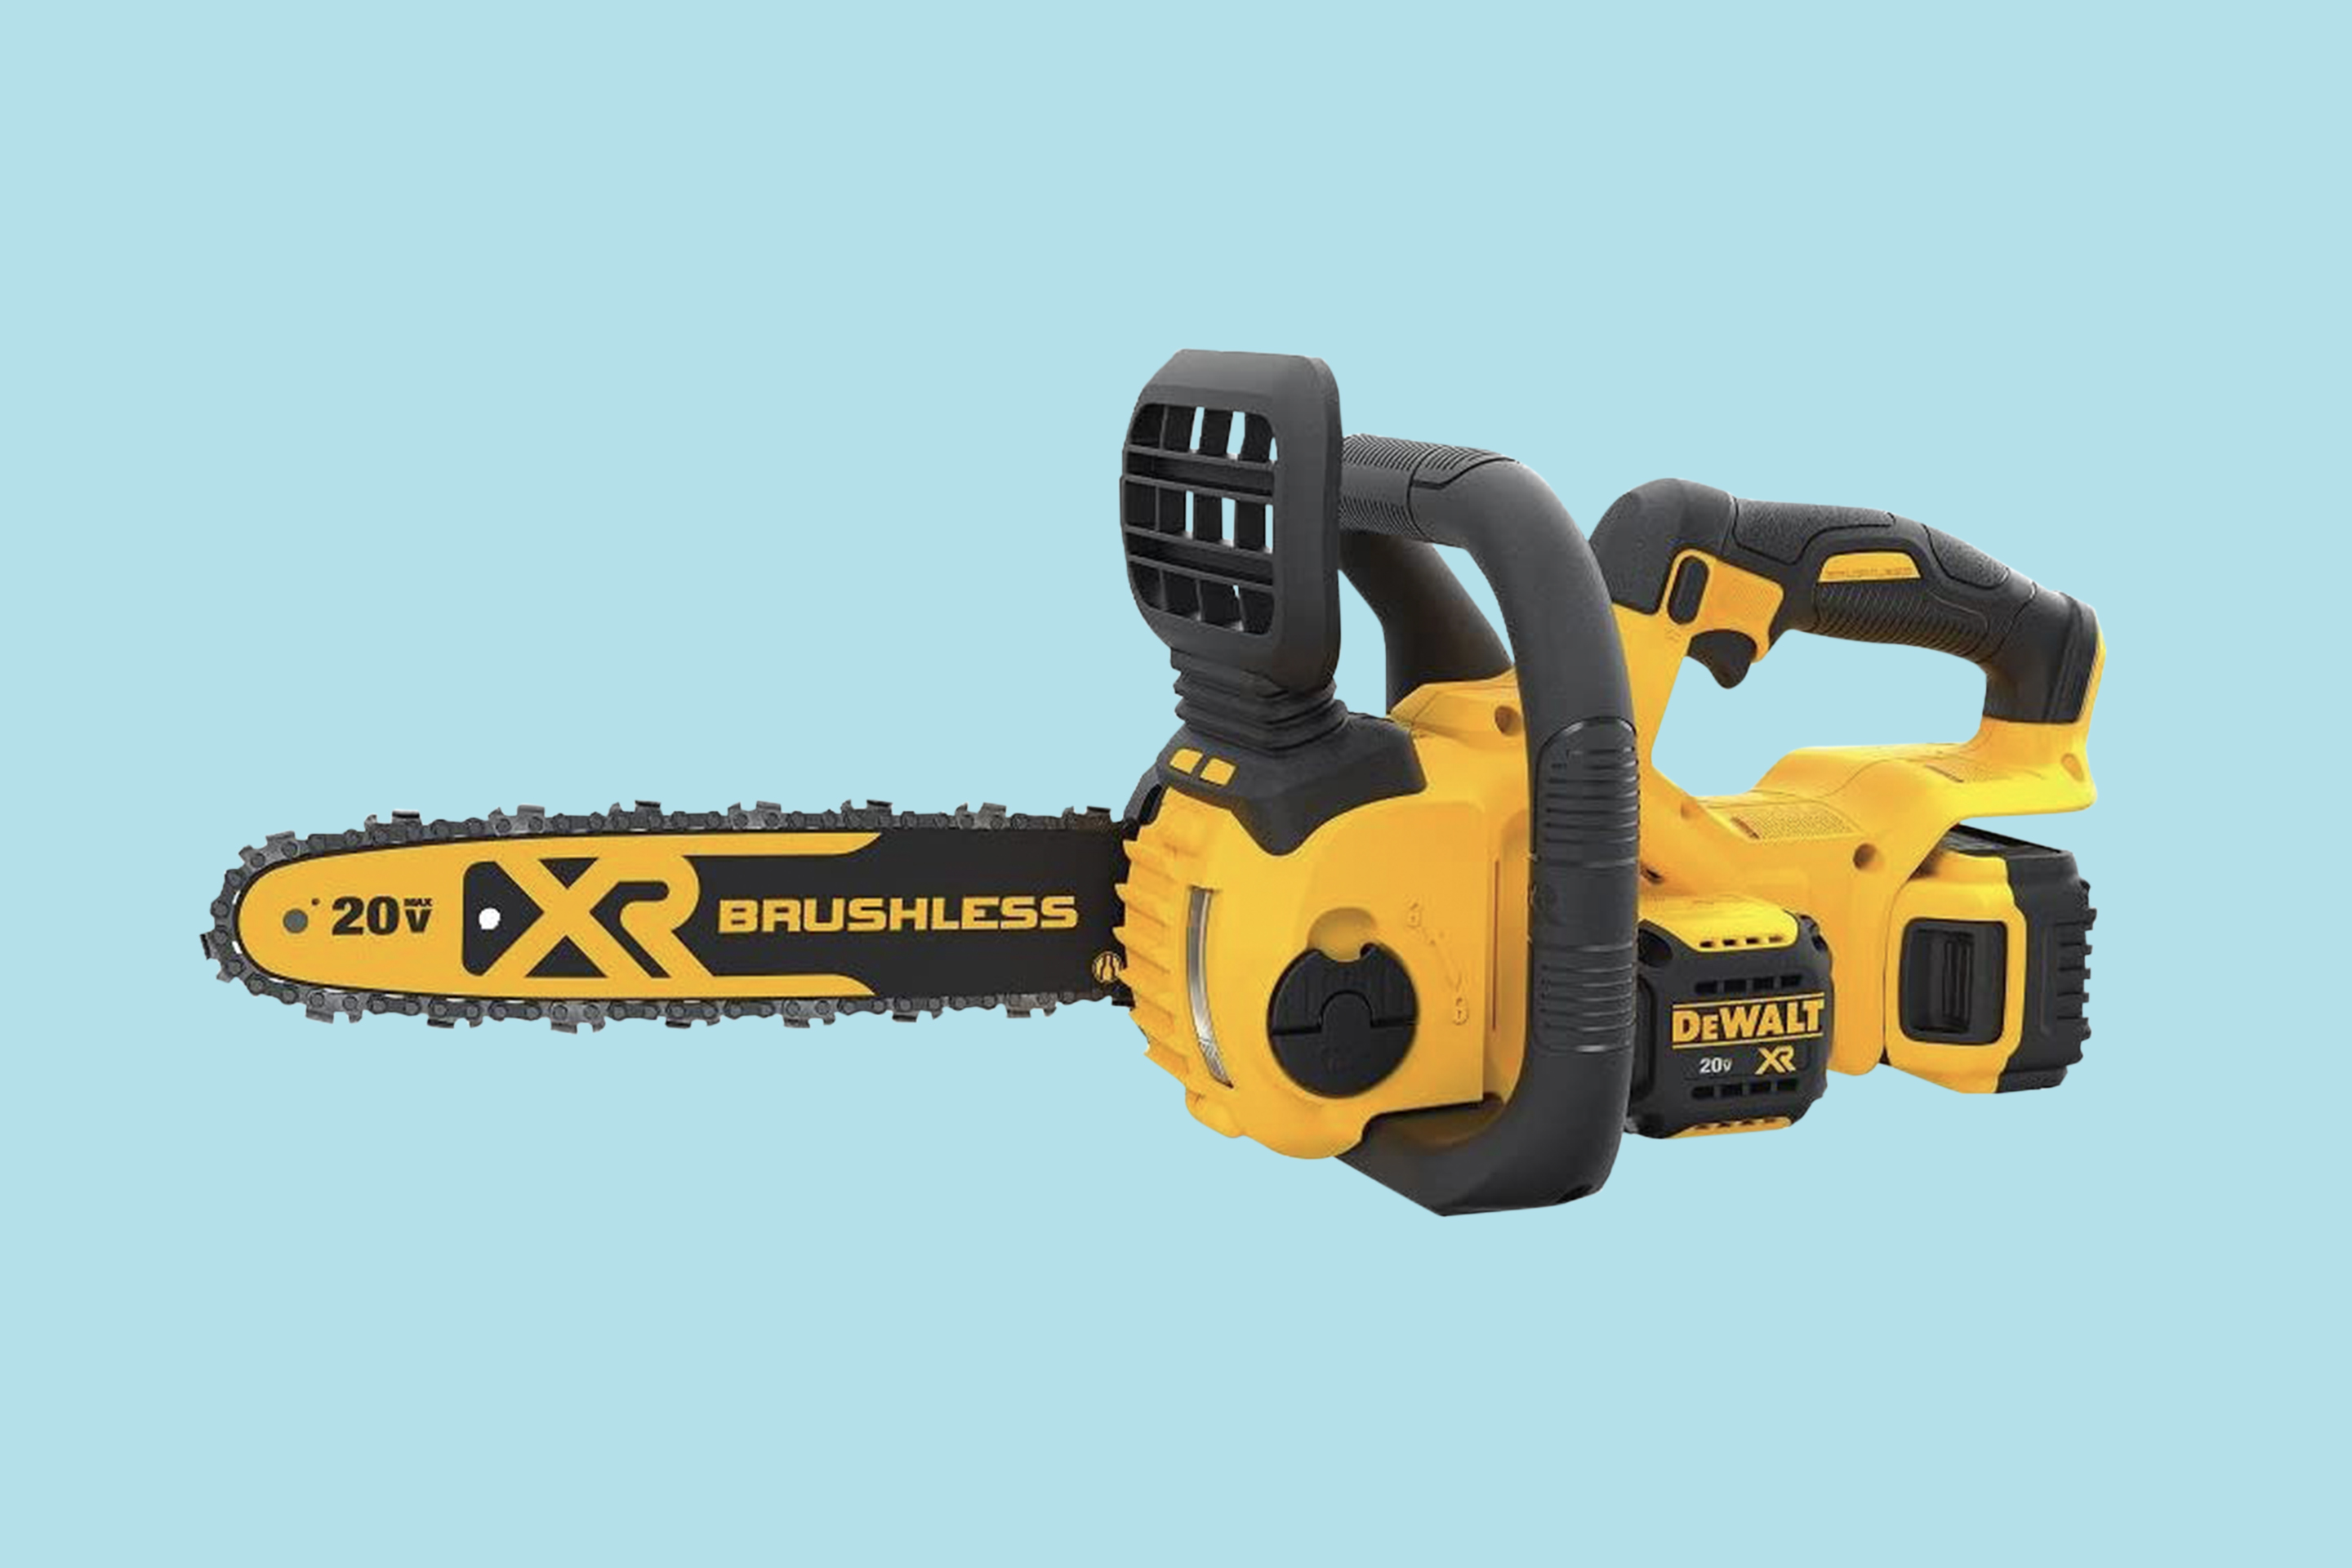 Saker Mini Chainsaw Review - Is It the Most Powerful Tool?